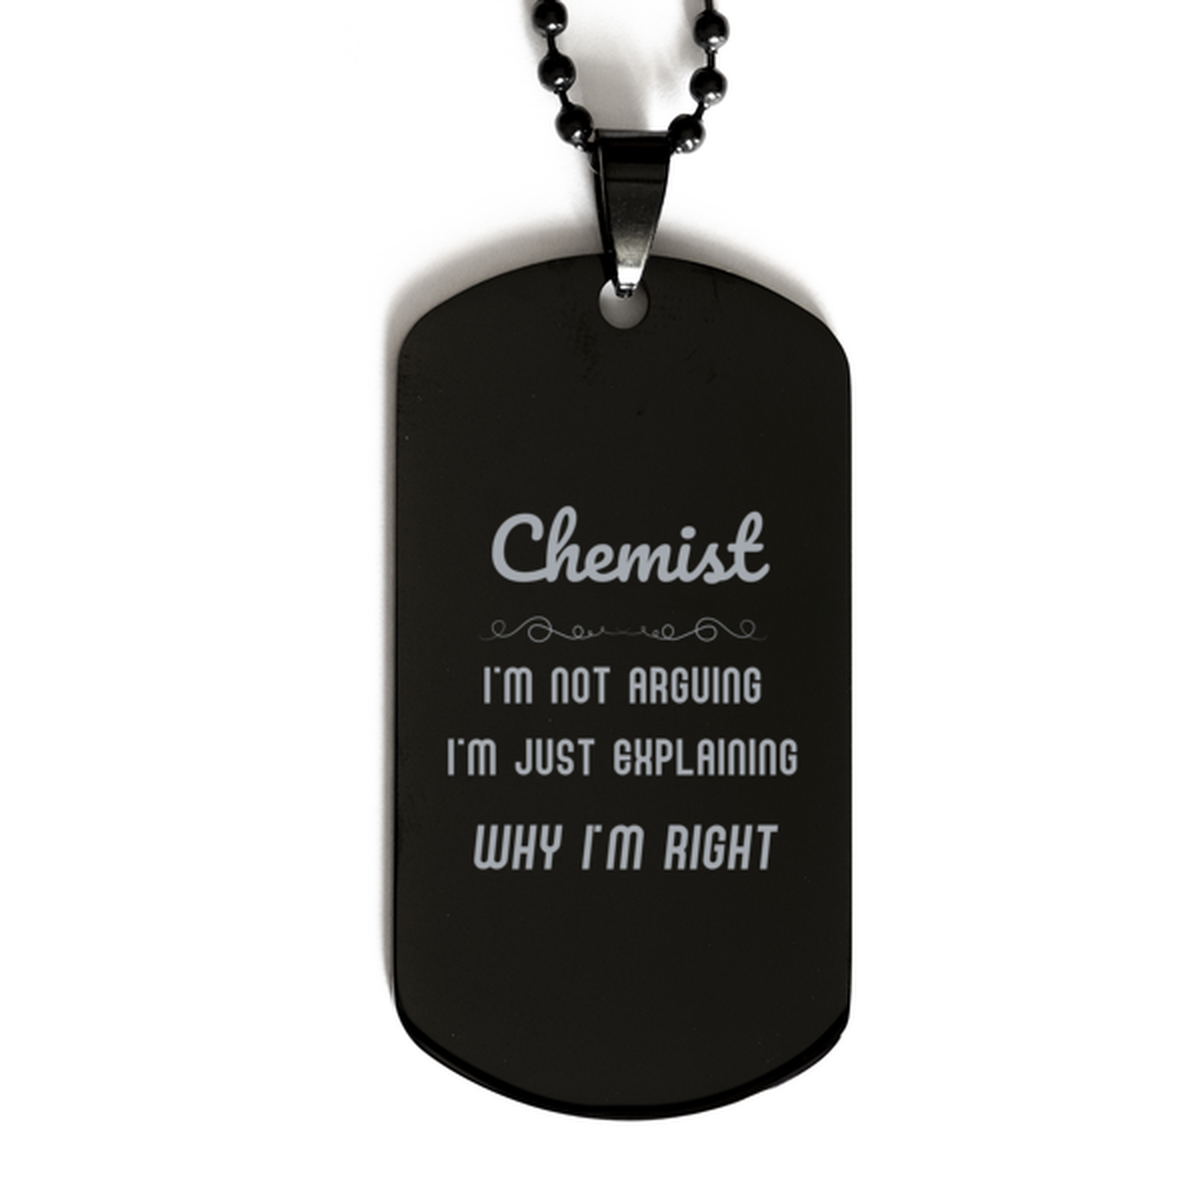 Chemist I'm not Arguing. I'm Just Explaining Why I'm RIGHT Black Dog Tag, Funny Saying Quote Chemist Gifts For Chemist Graduation Birthday Christmas Gifts for Men Women Coworker